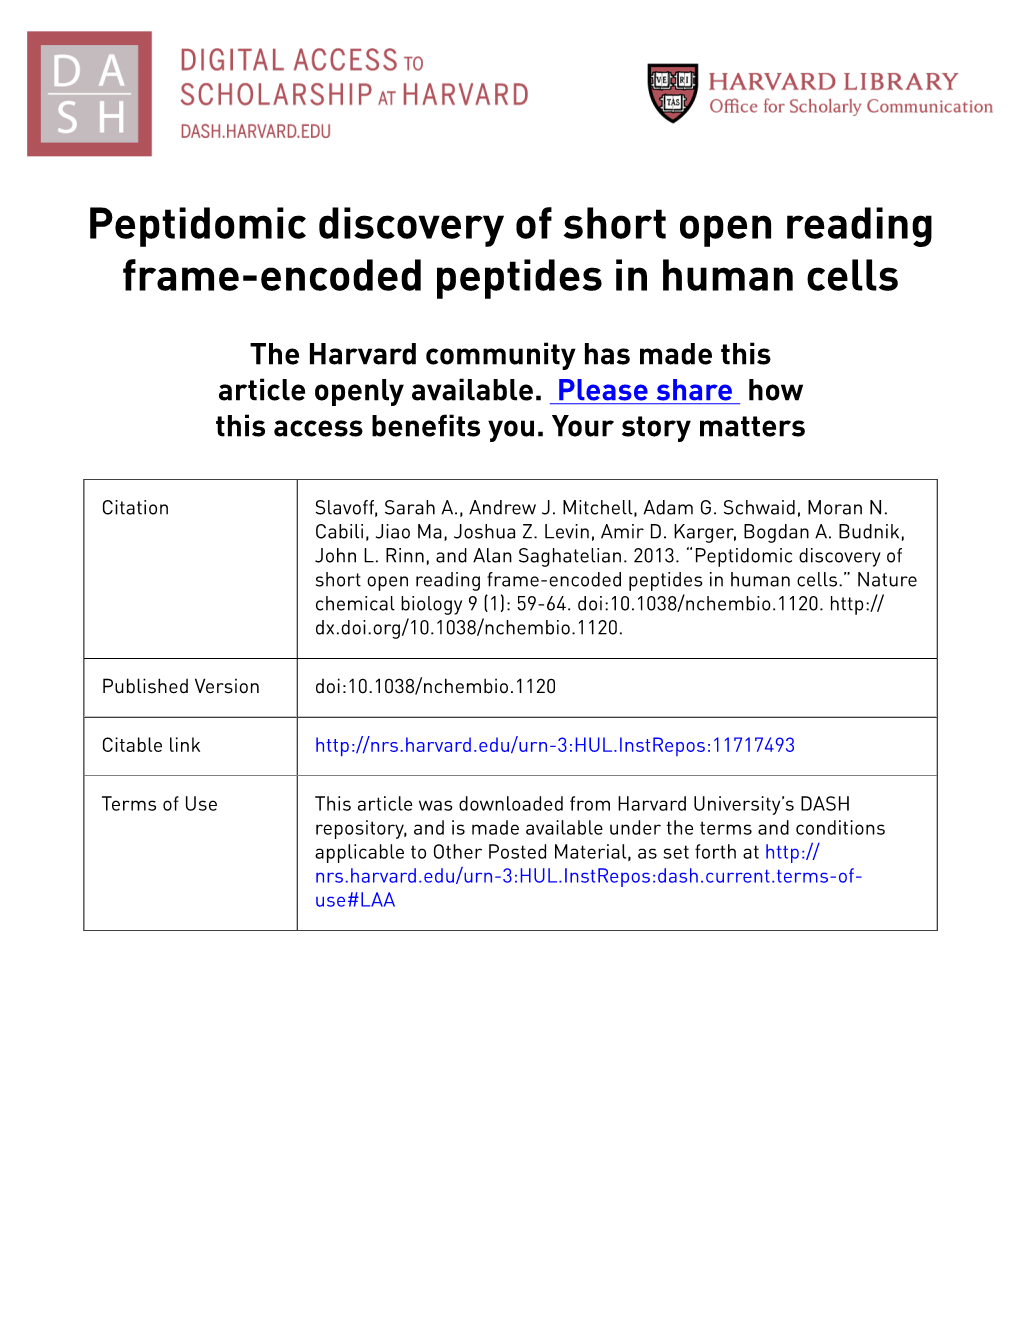 Peptidomic Discovery of Short Open Reading Frame-Encoded Peptides in Human Cells